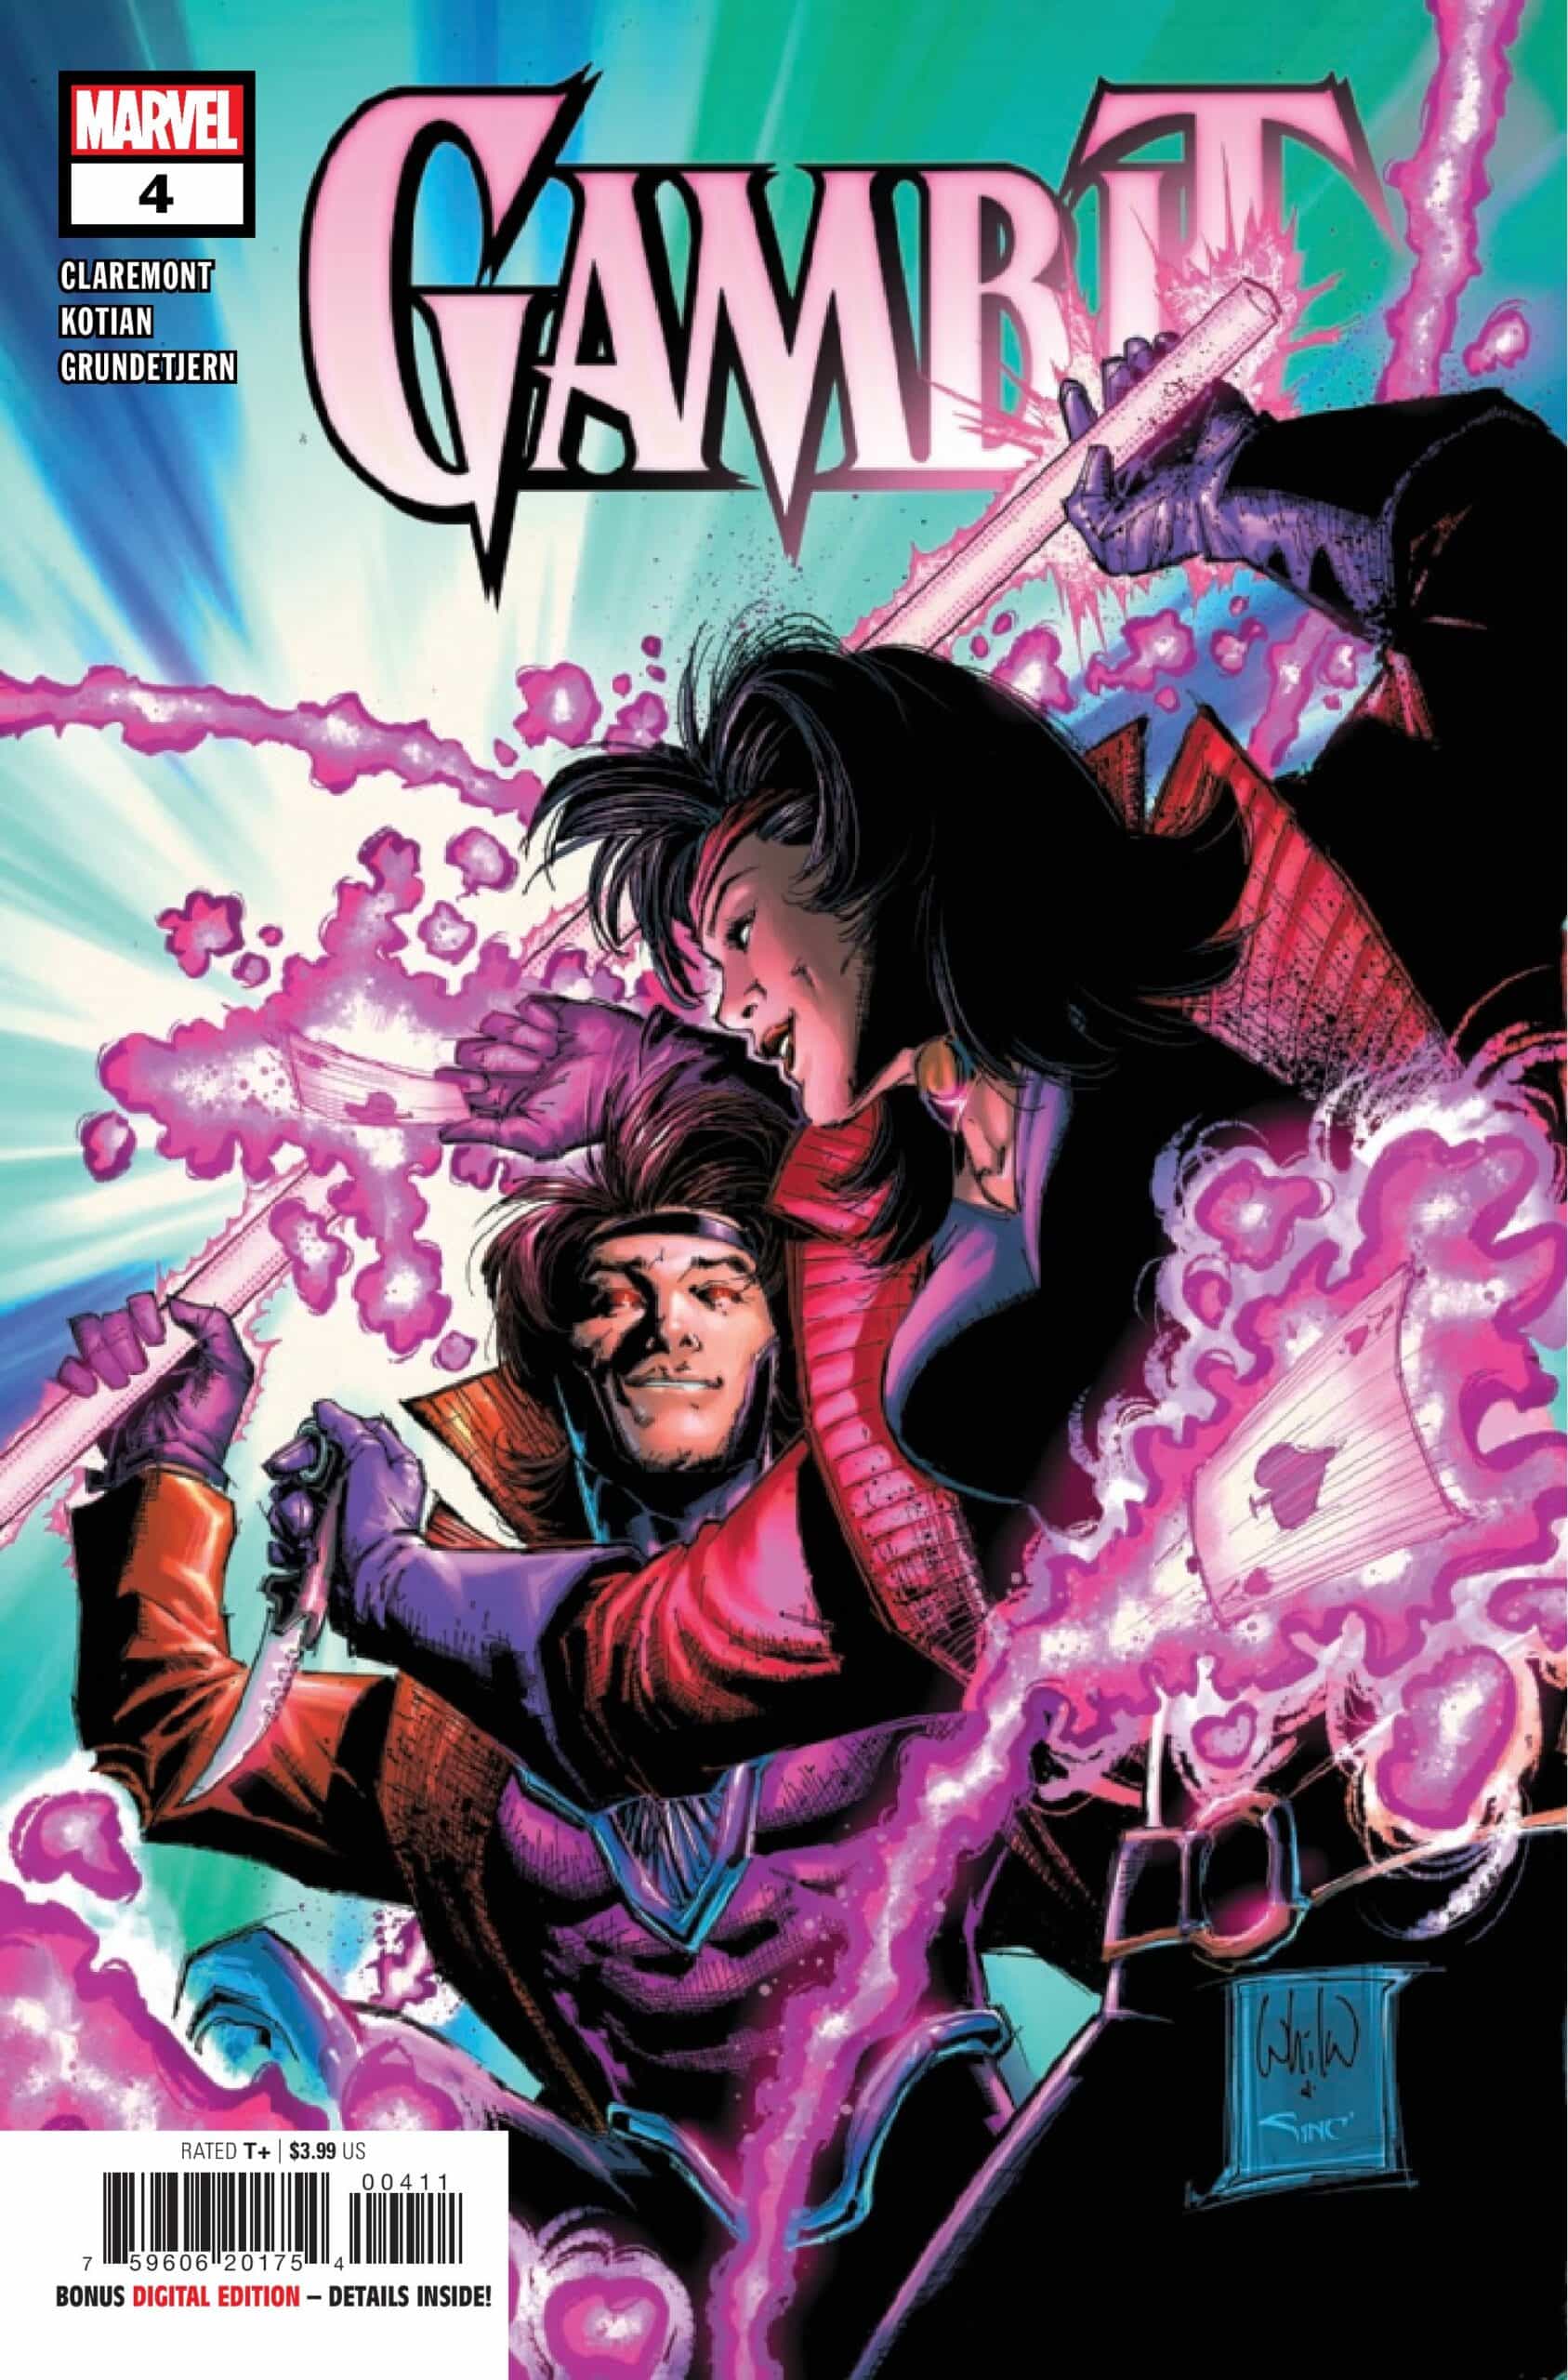 Mourn The Death Of Gambit In Our Exclusive Preview Of Knights Of X